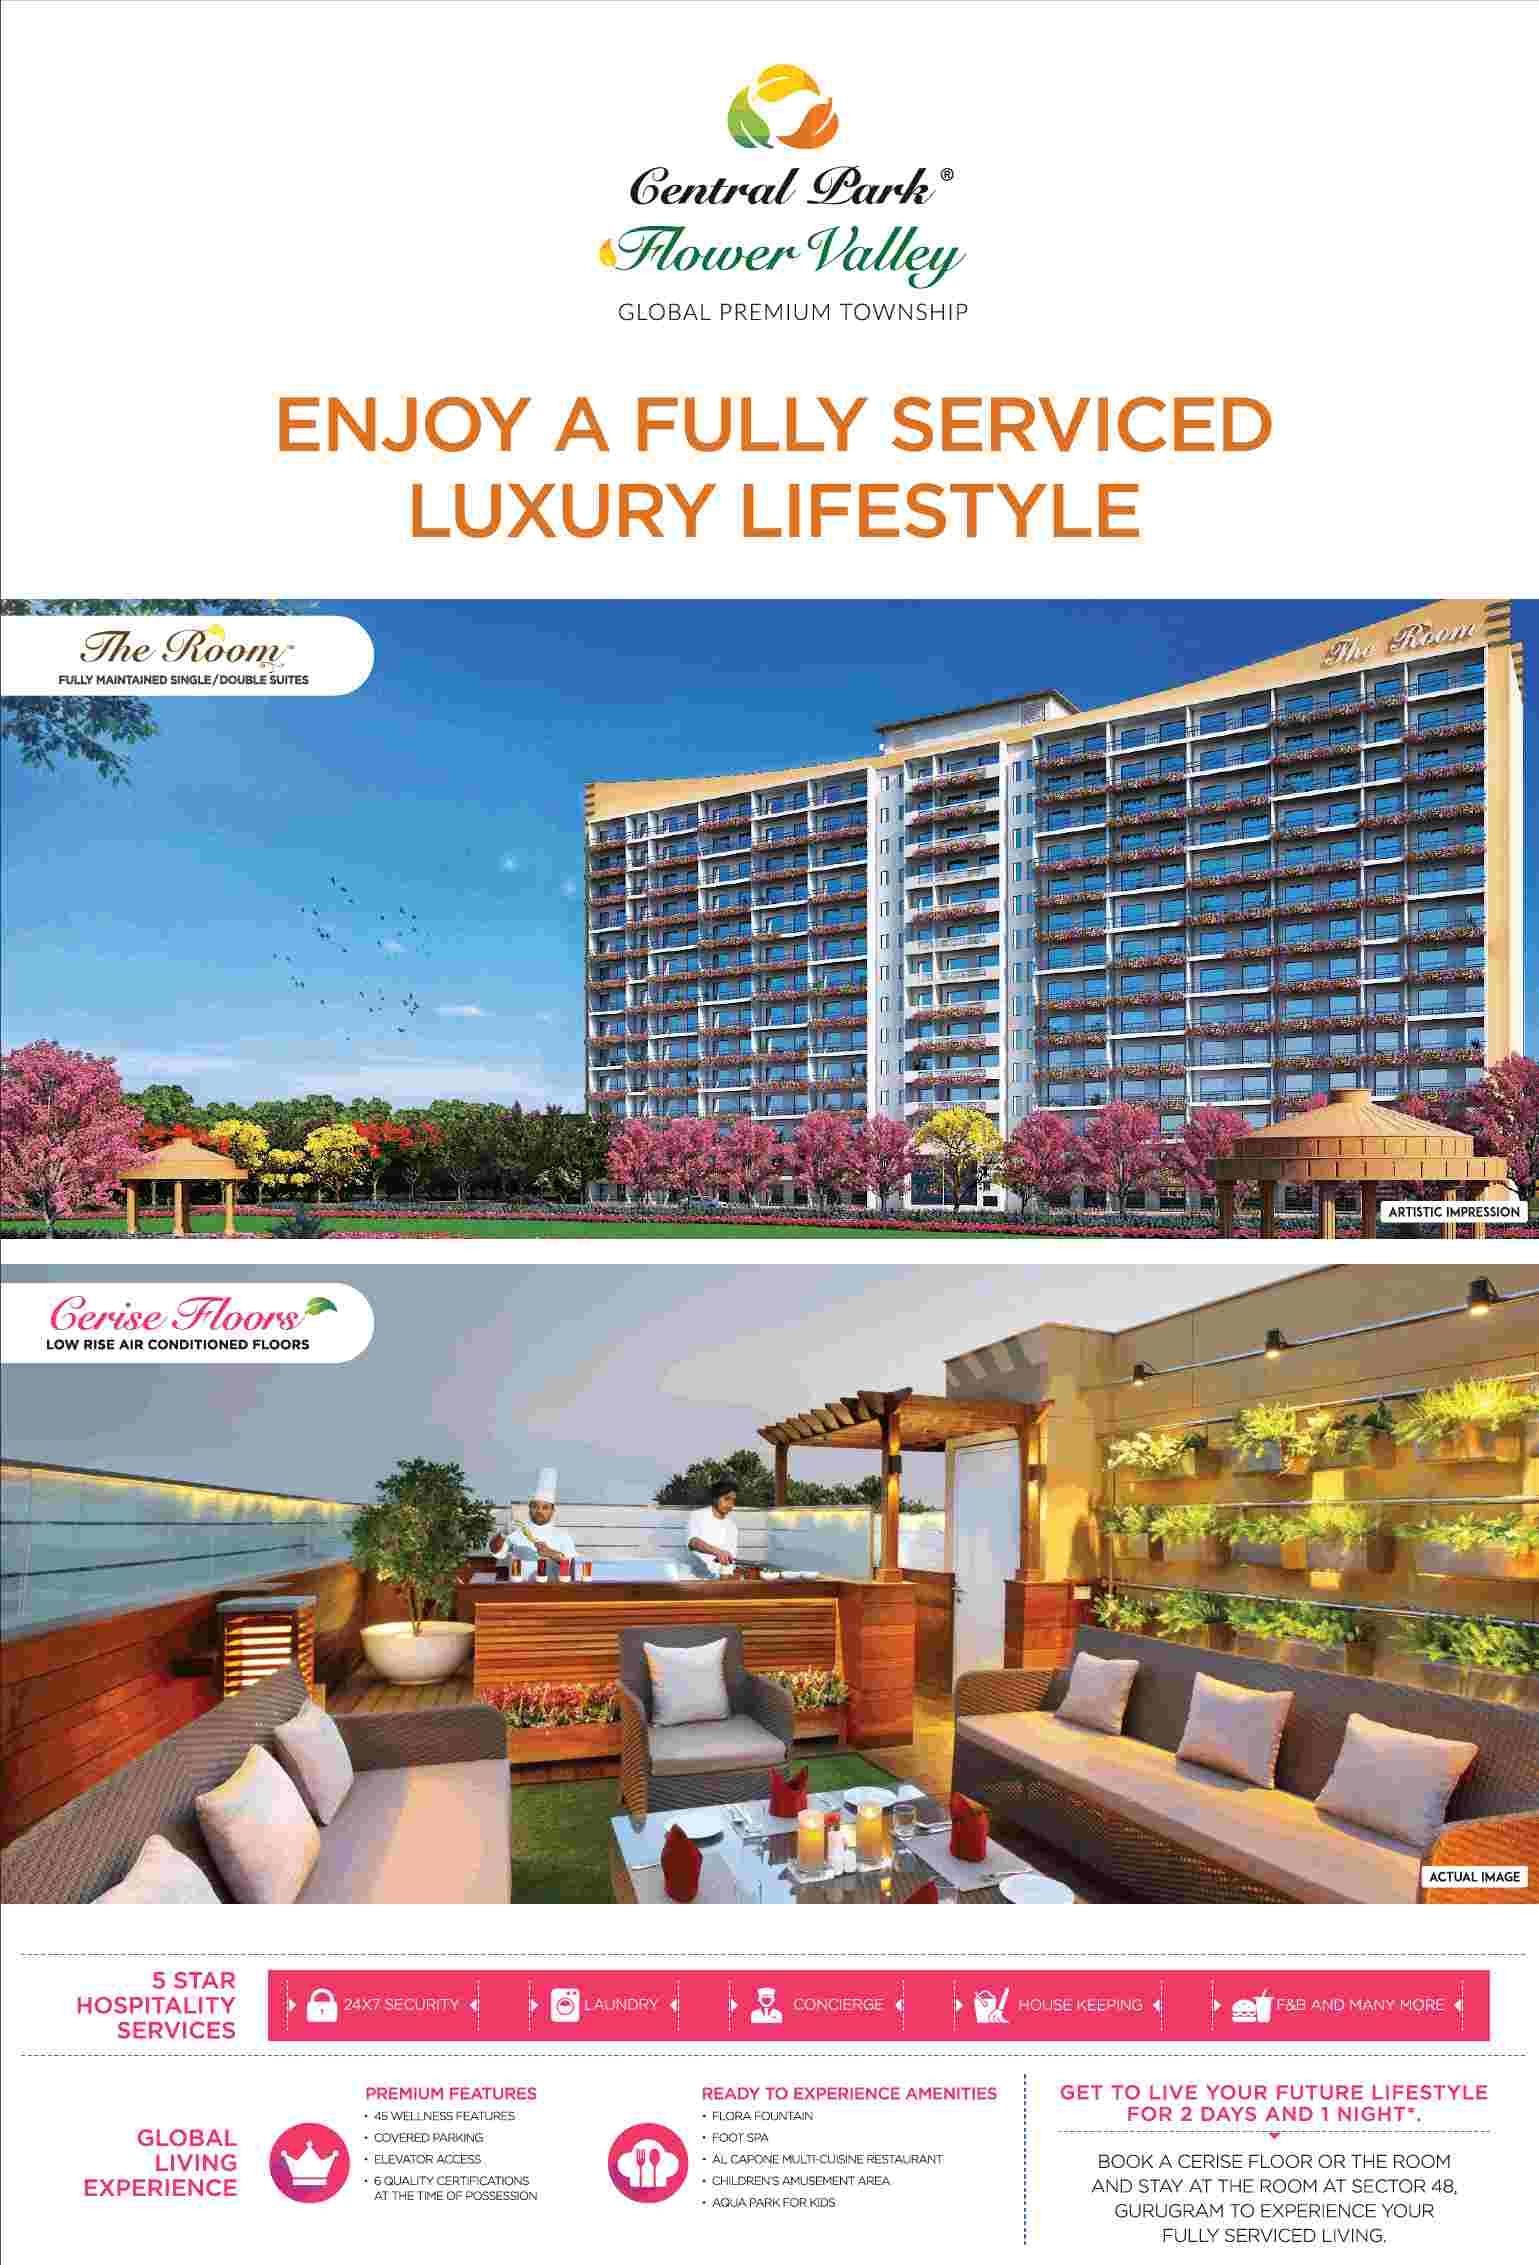 Enjoy a fully serviced luxury lifestyle at the Central Park Flower Valley in Gurgaon Update